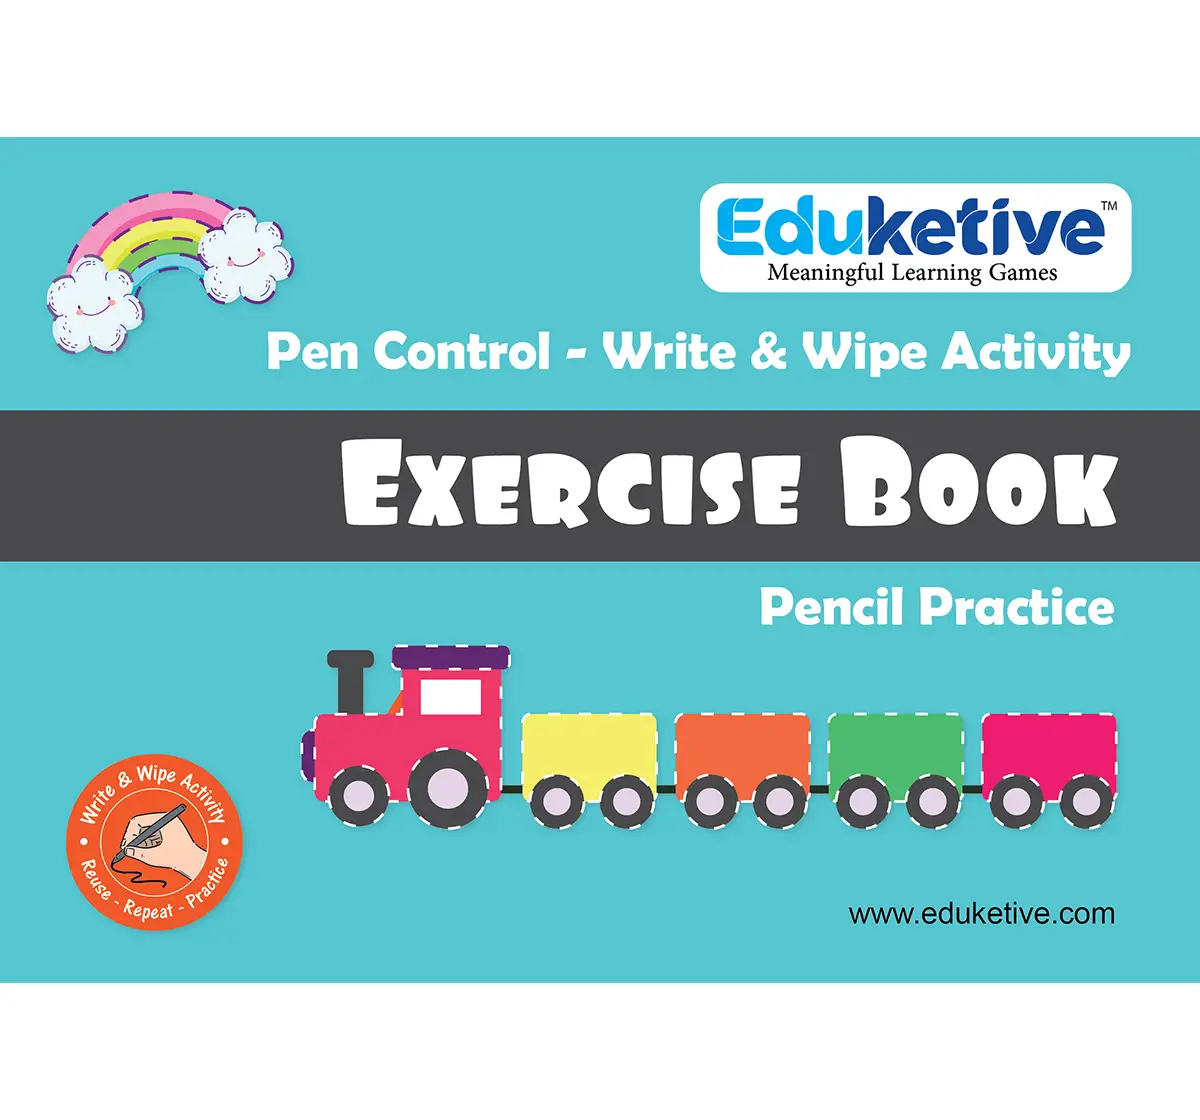 Eduketive Pen Control Write & Wipe Reusable Activity 3-6 yrs Writing Practice Preschool Learning Educational Game with Exercise Book